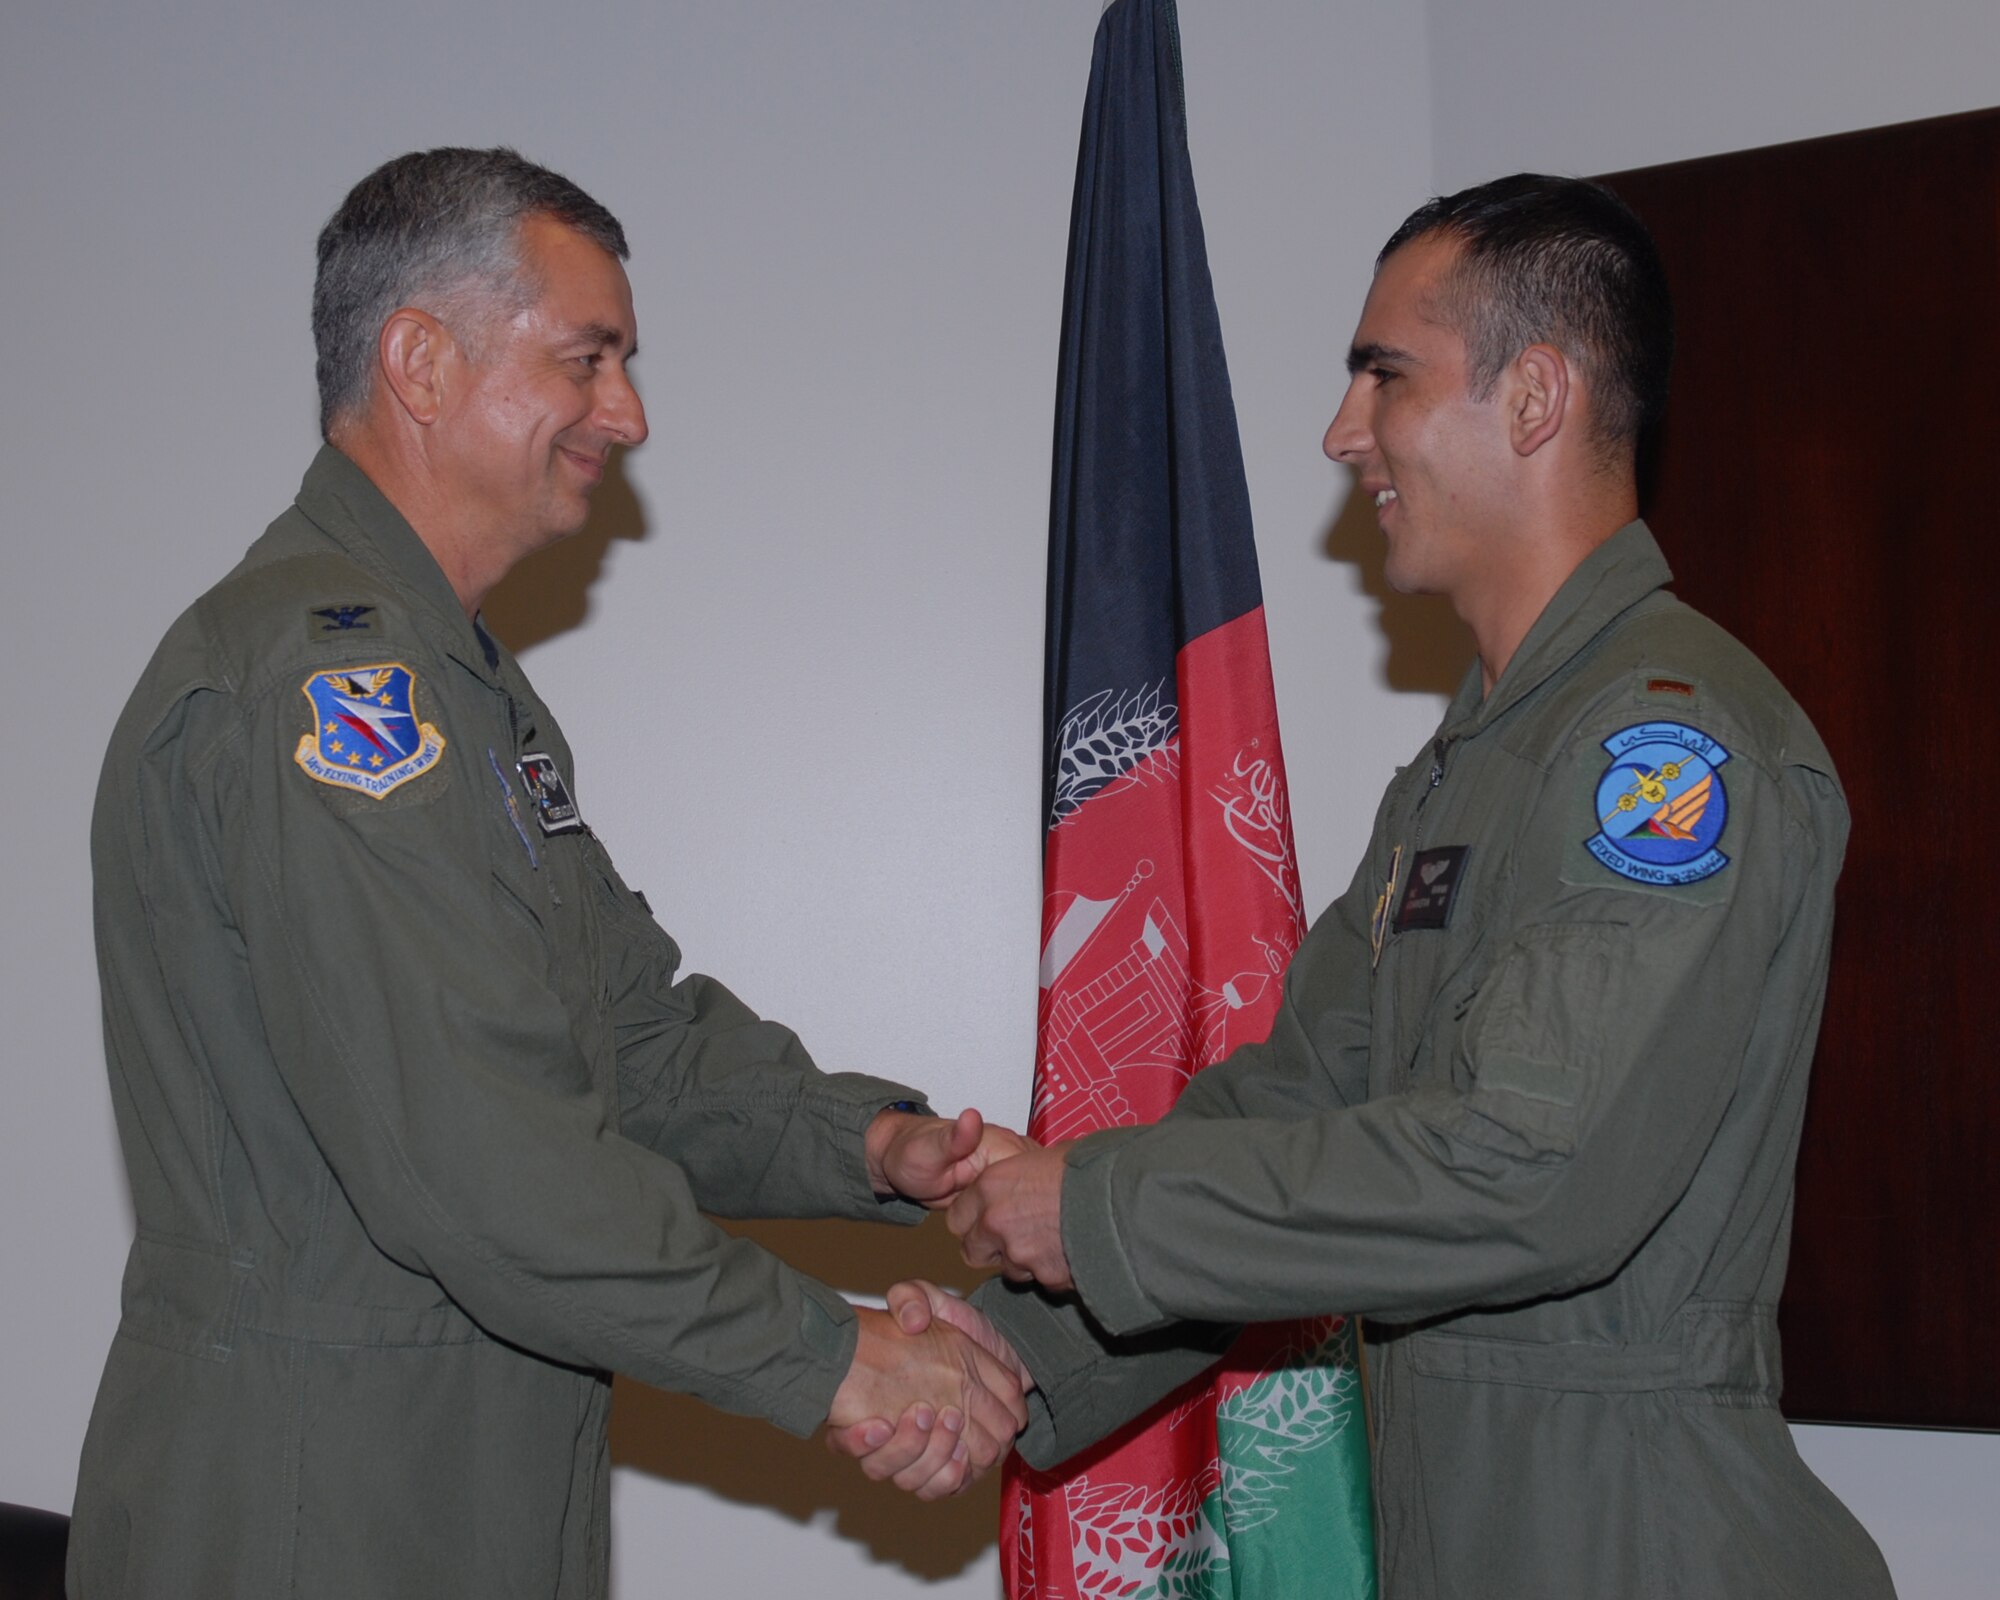 Col. Roger Watkins, 14th Flying Training Wing commander, presents Afghan National Army Air Corps Lt. Faiz Ramaki his Air Force silver wings at a special Aviation Leadership Program ceremony Friday. (US Air Force Photo/Melissa Duncan)